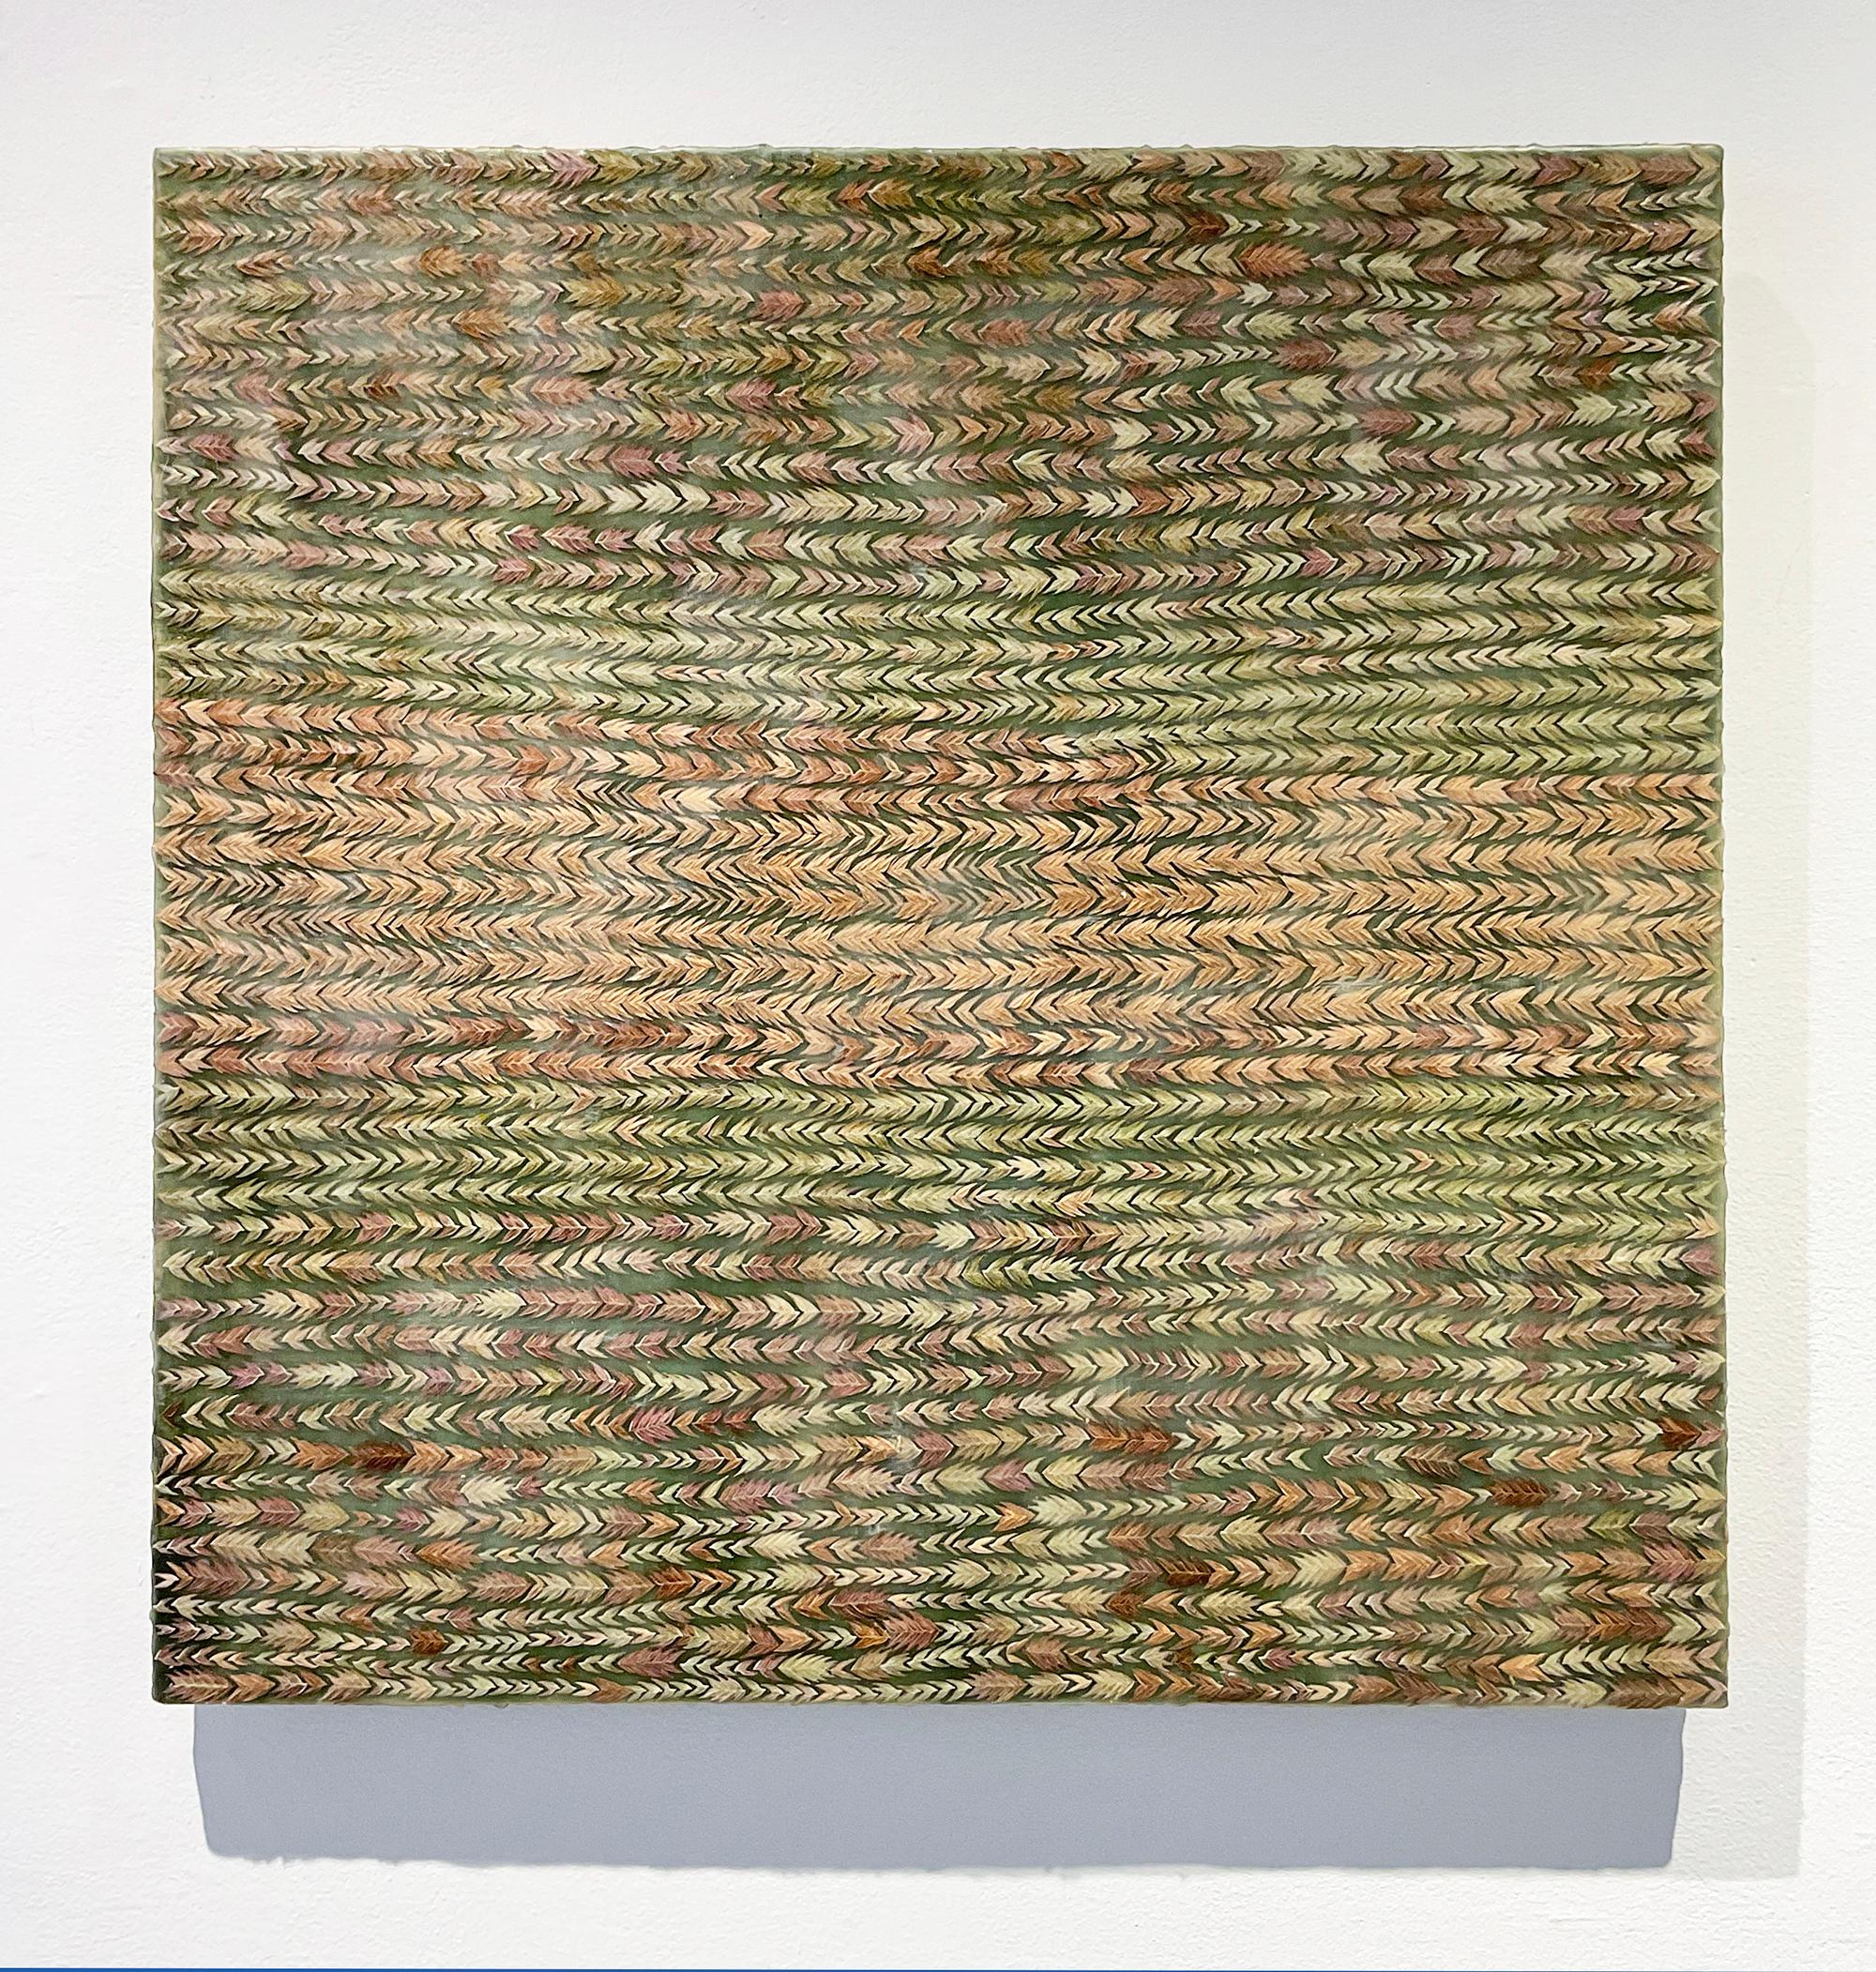 Abstract encaustic painting with a green, earth toned palette.
Made with natural plant material (Northern Sea Oats)
